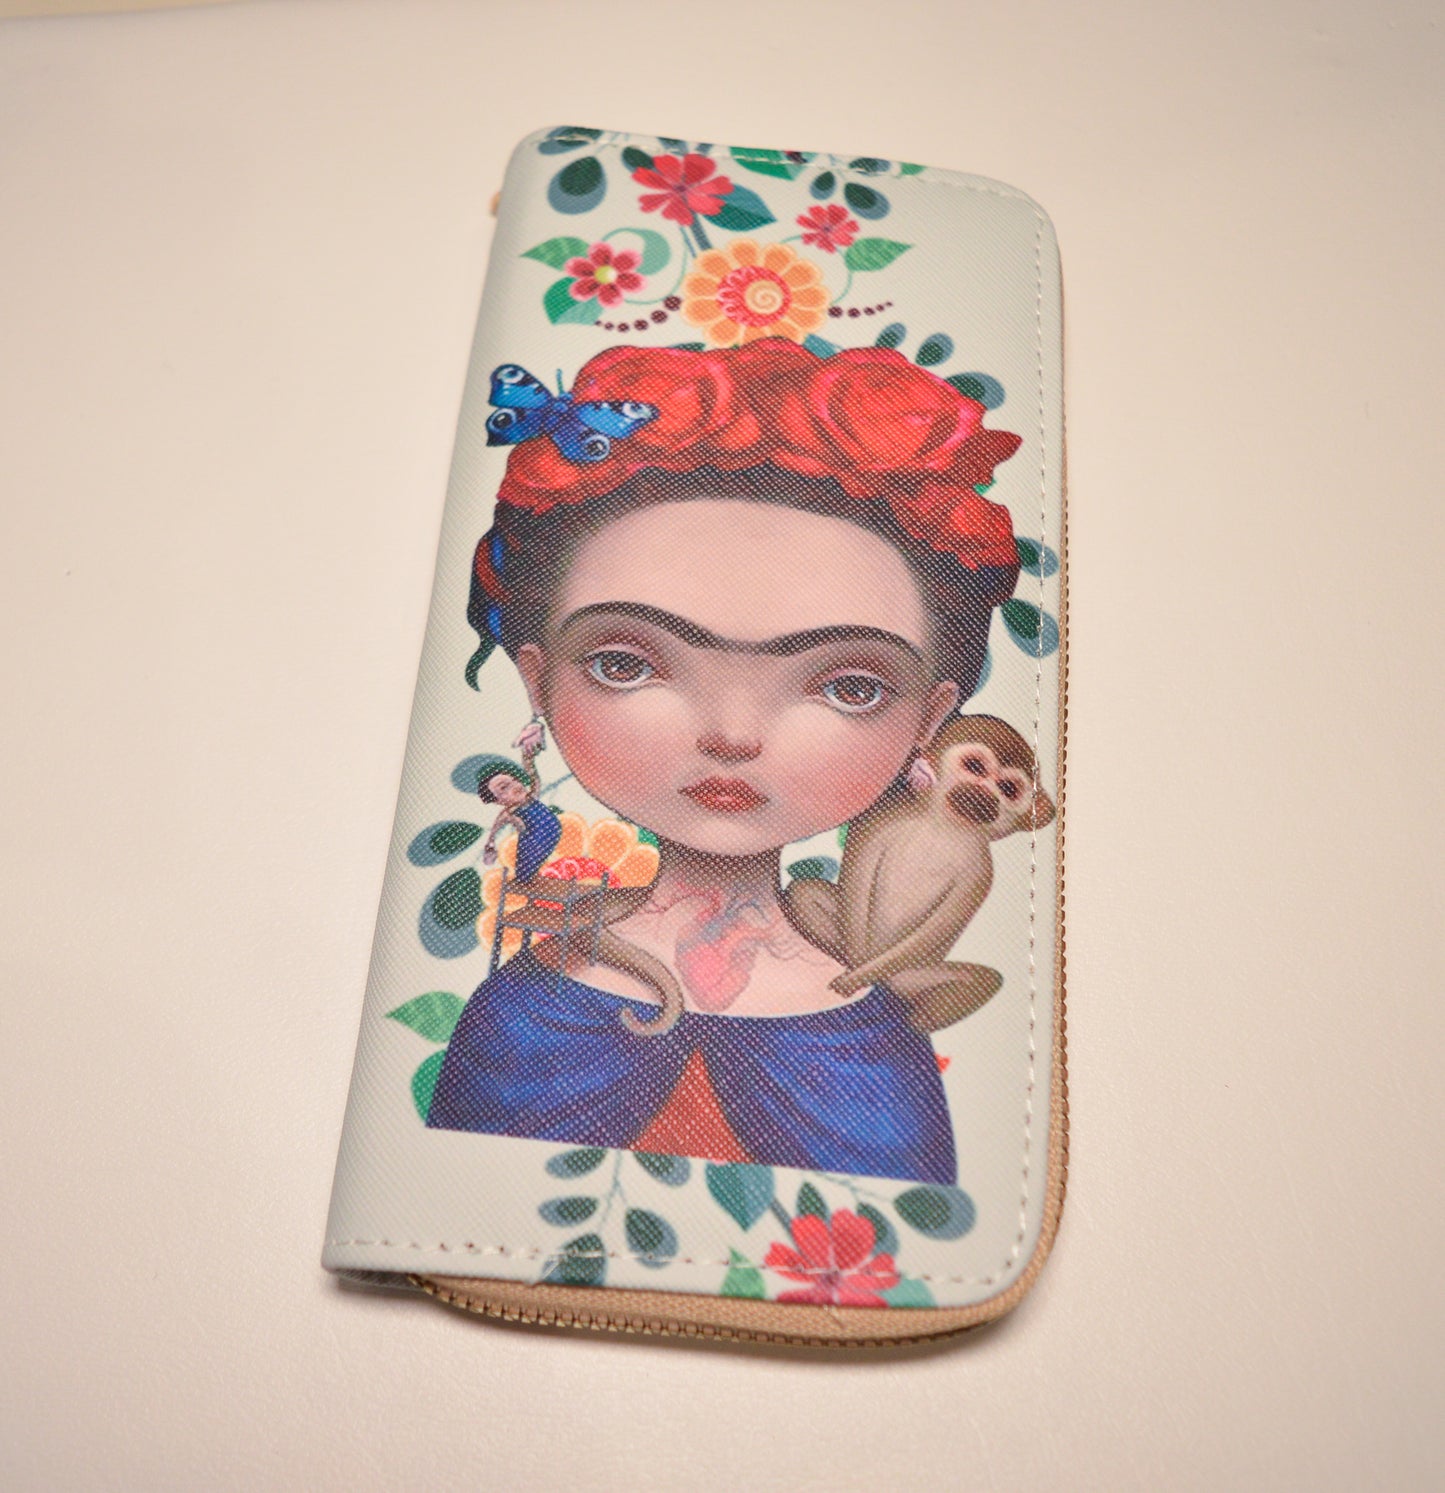 Firda kahlo wallet 8 inches by 4 inches